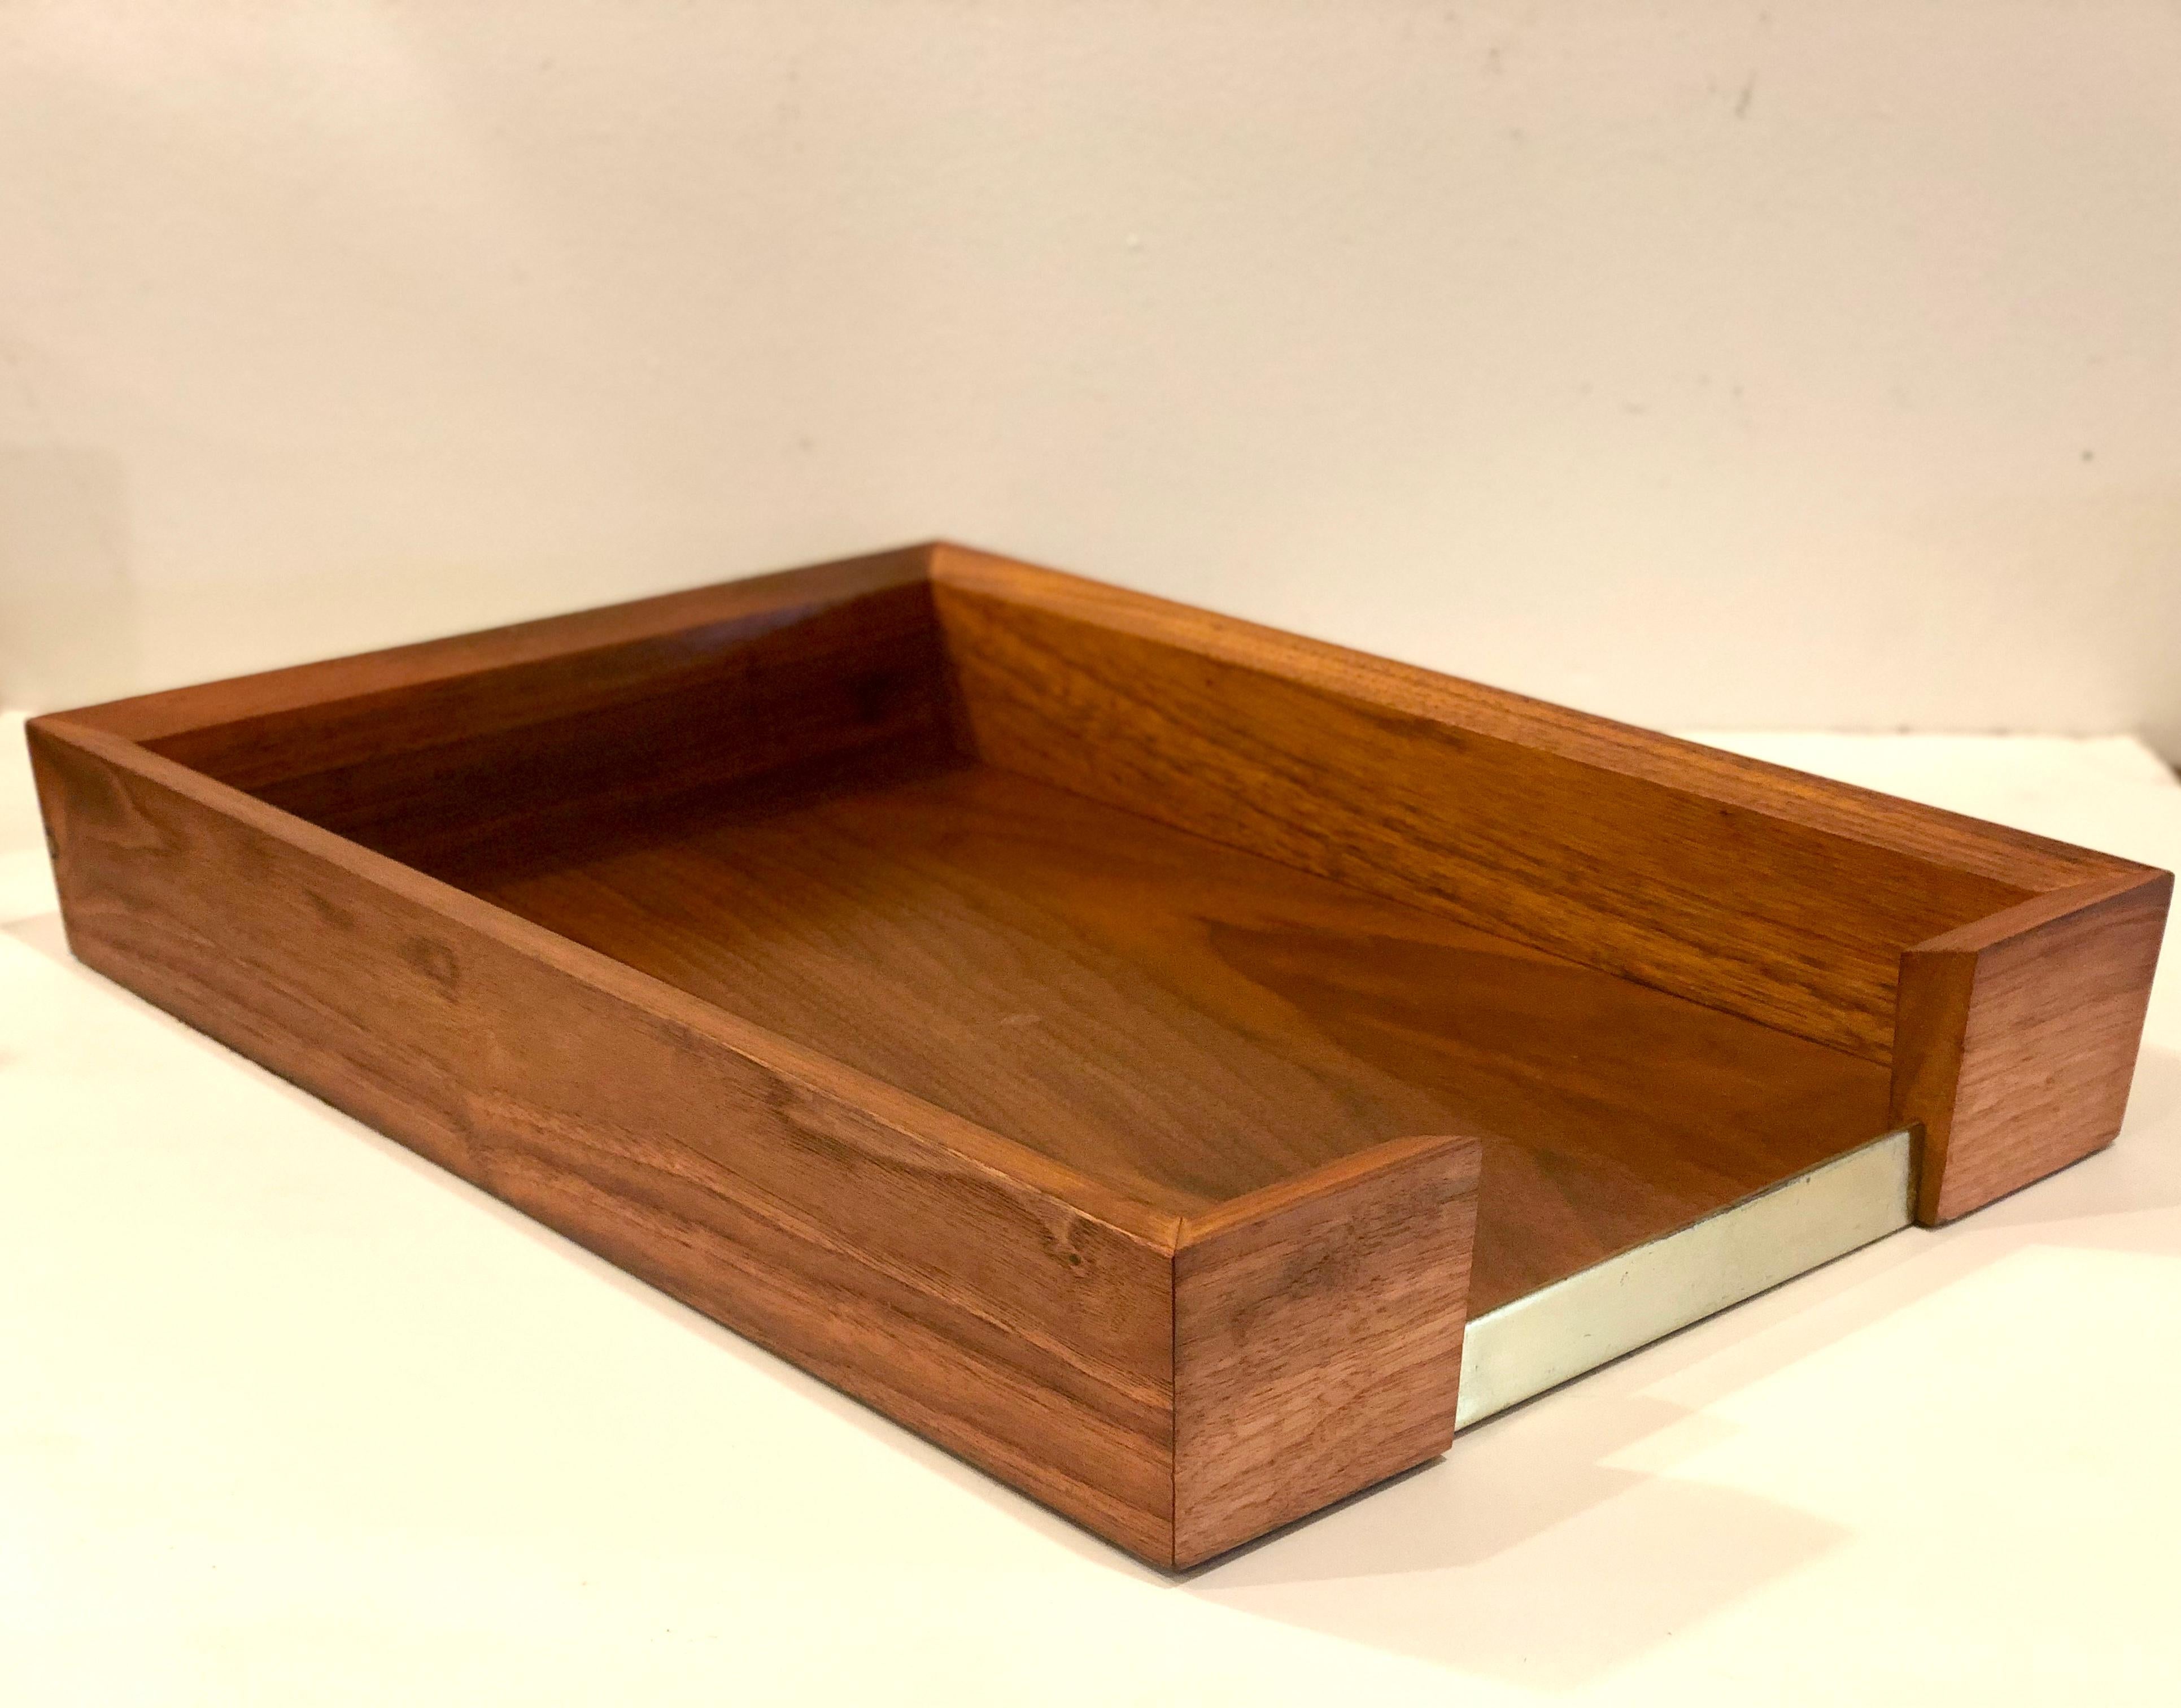 Paper letter tray with brass detail and solid walnut walls, circa 1950s freshly refinished, Very nice accent to any executives desk.